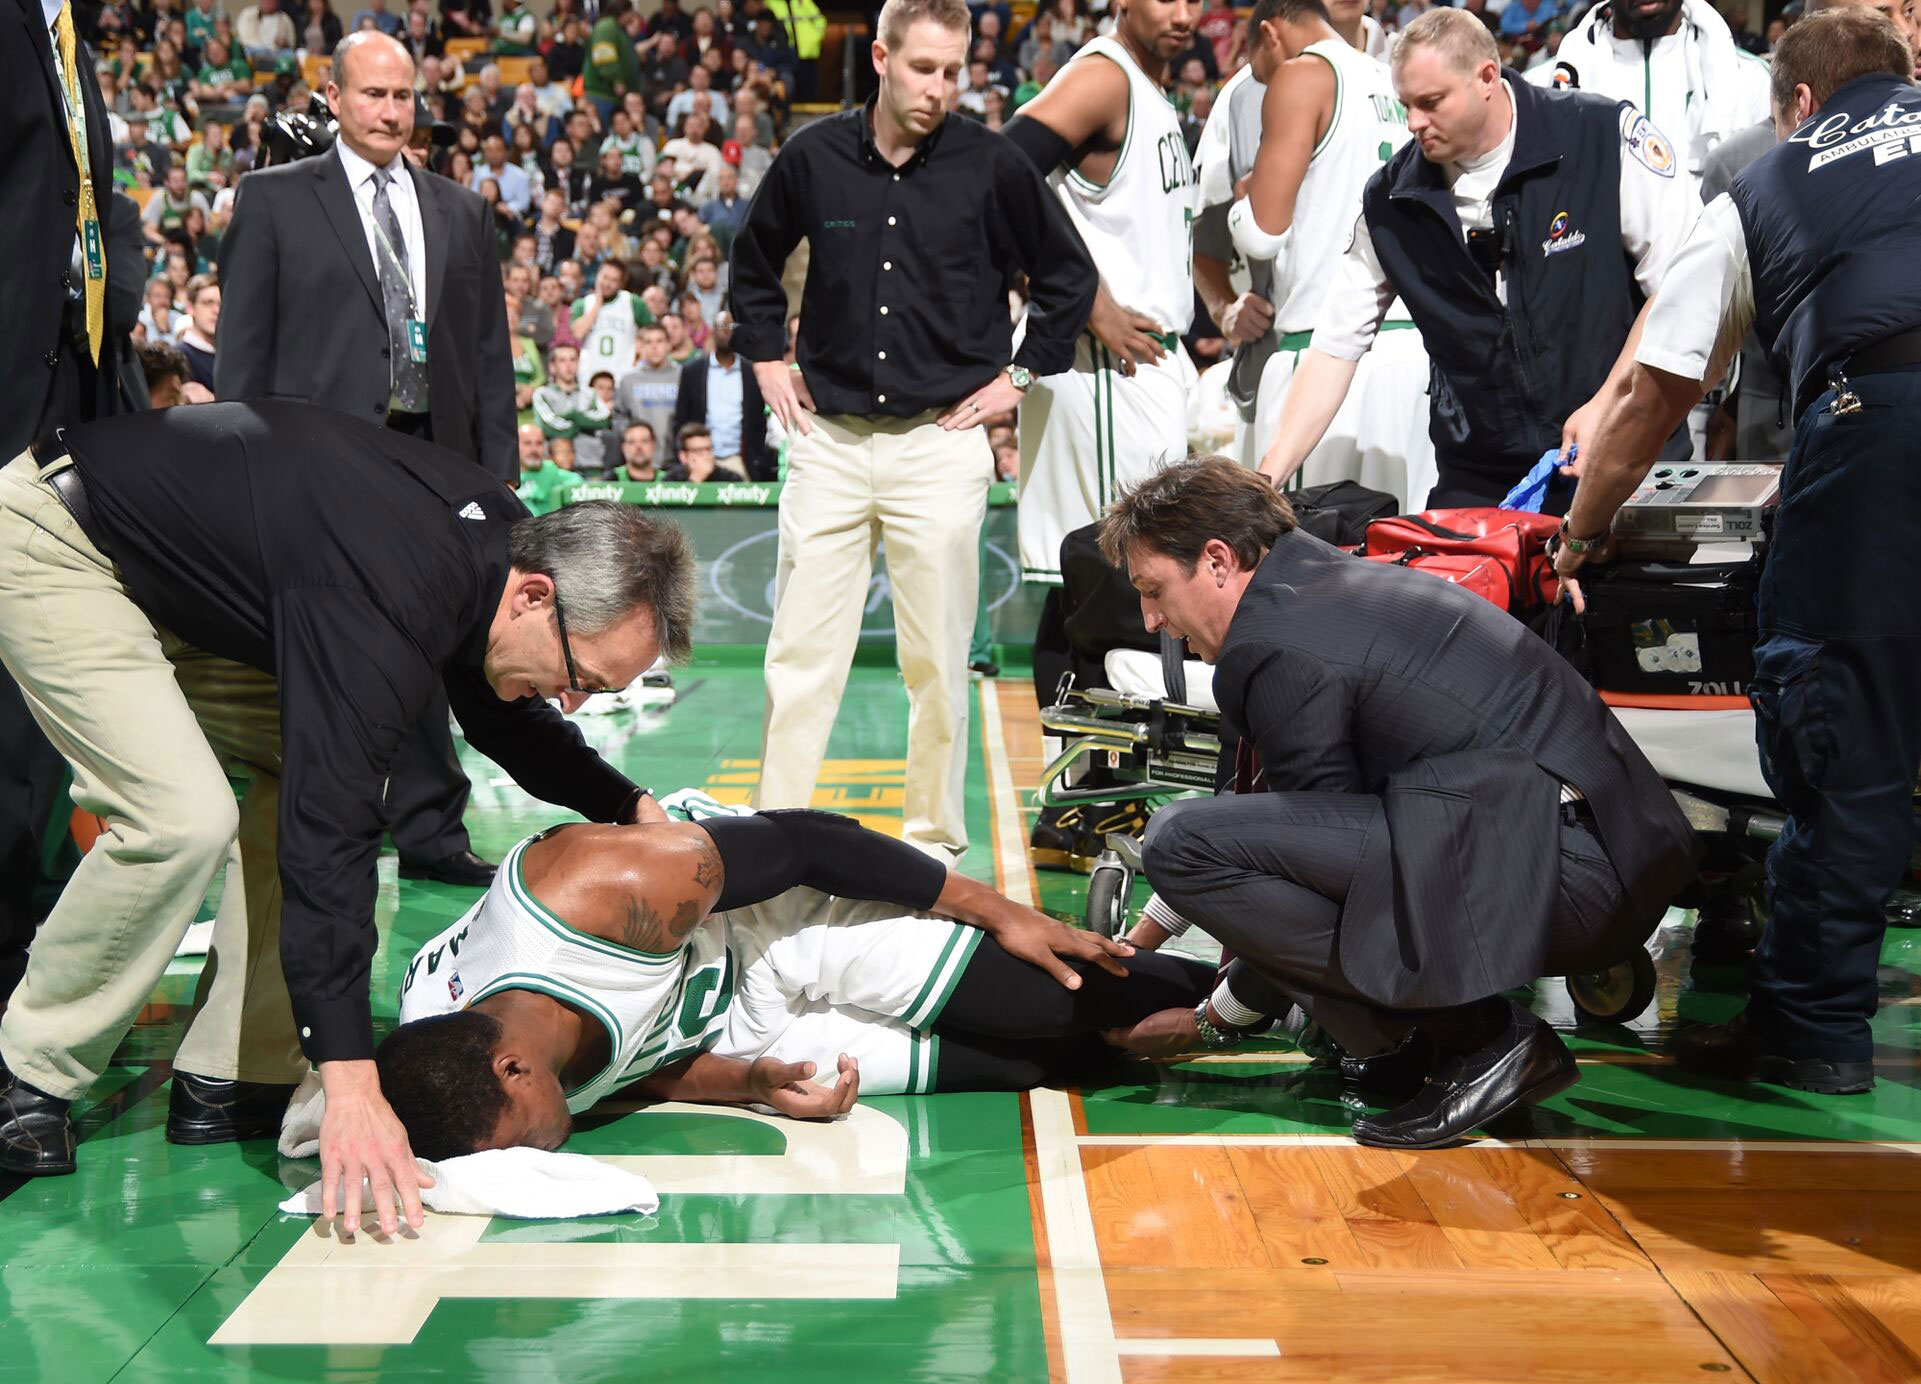 Brian McKeon, chief medical officer and team physician for the Boston Celtics